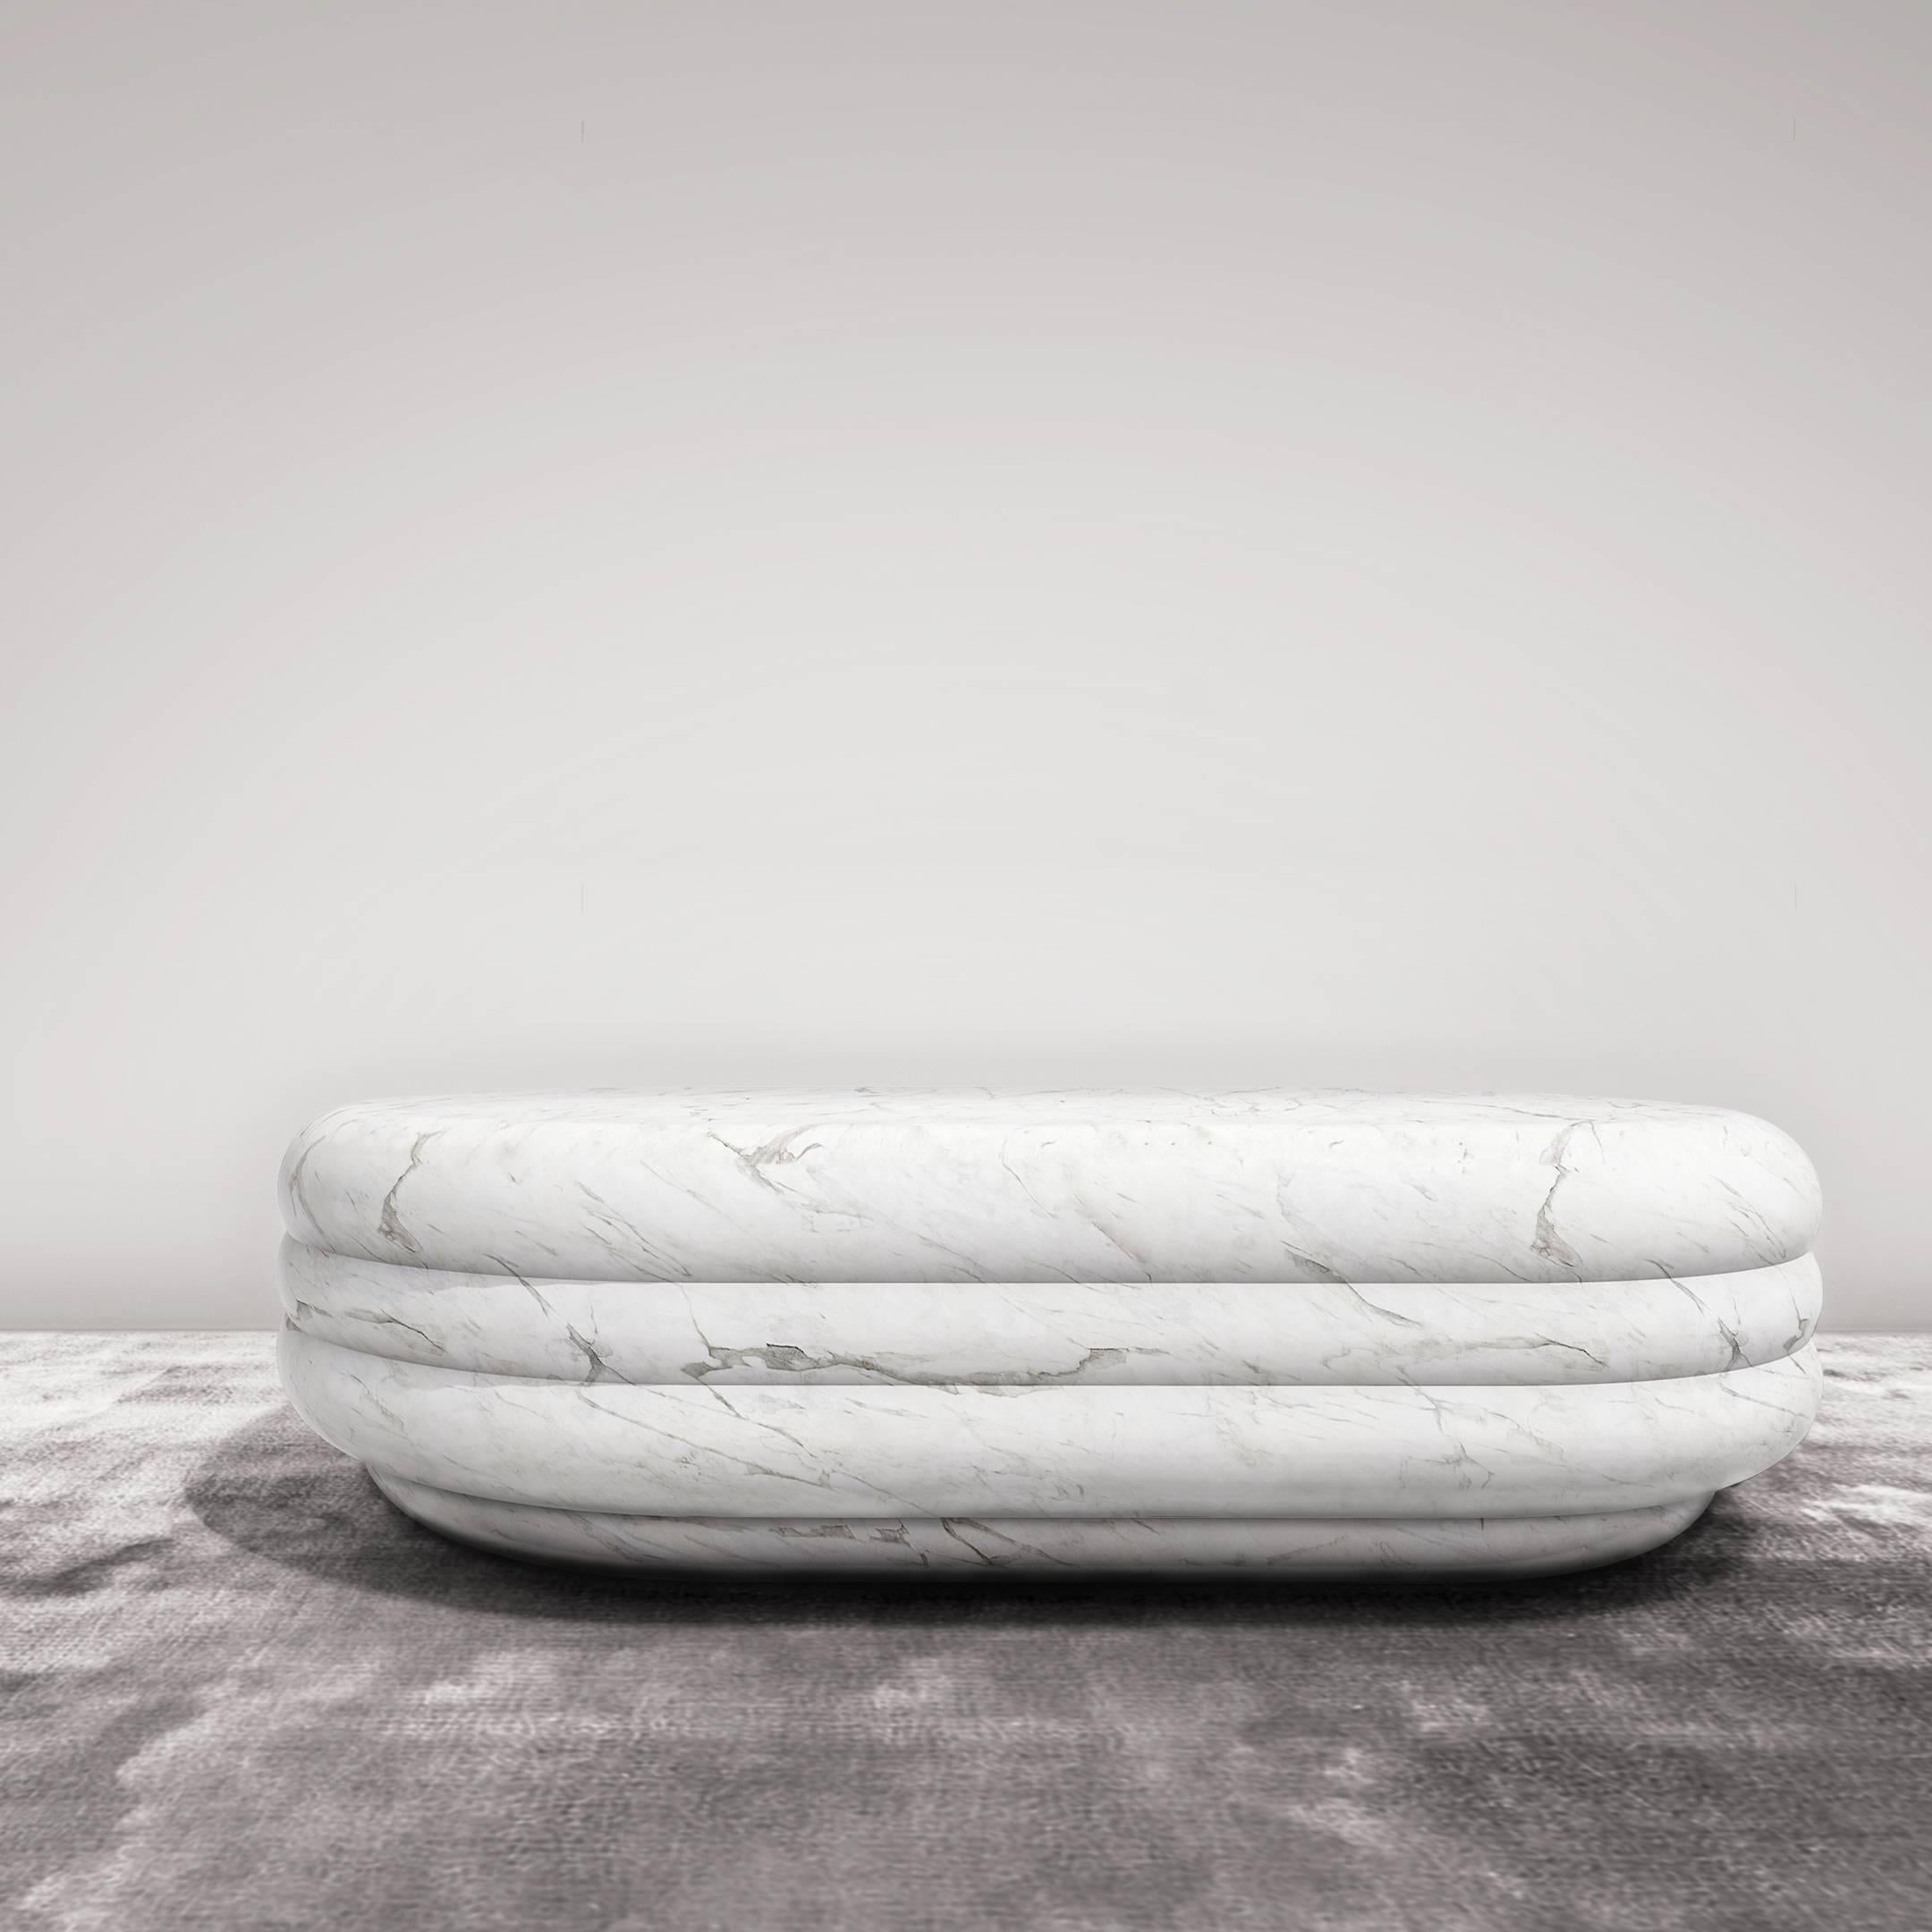 In ancient Rome and Greece figures of divinities were sculpted in marble and so is this modern-day coffee table inspired by bodily curves. Carved from a solid block of marble, the voluptuous silhouette and silky honed surface of the oval shape